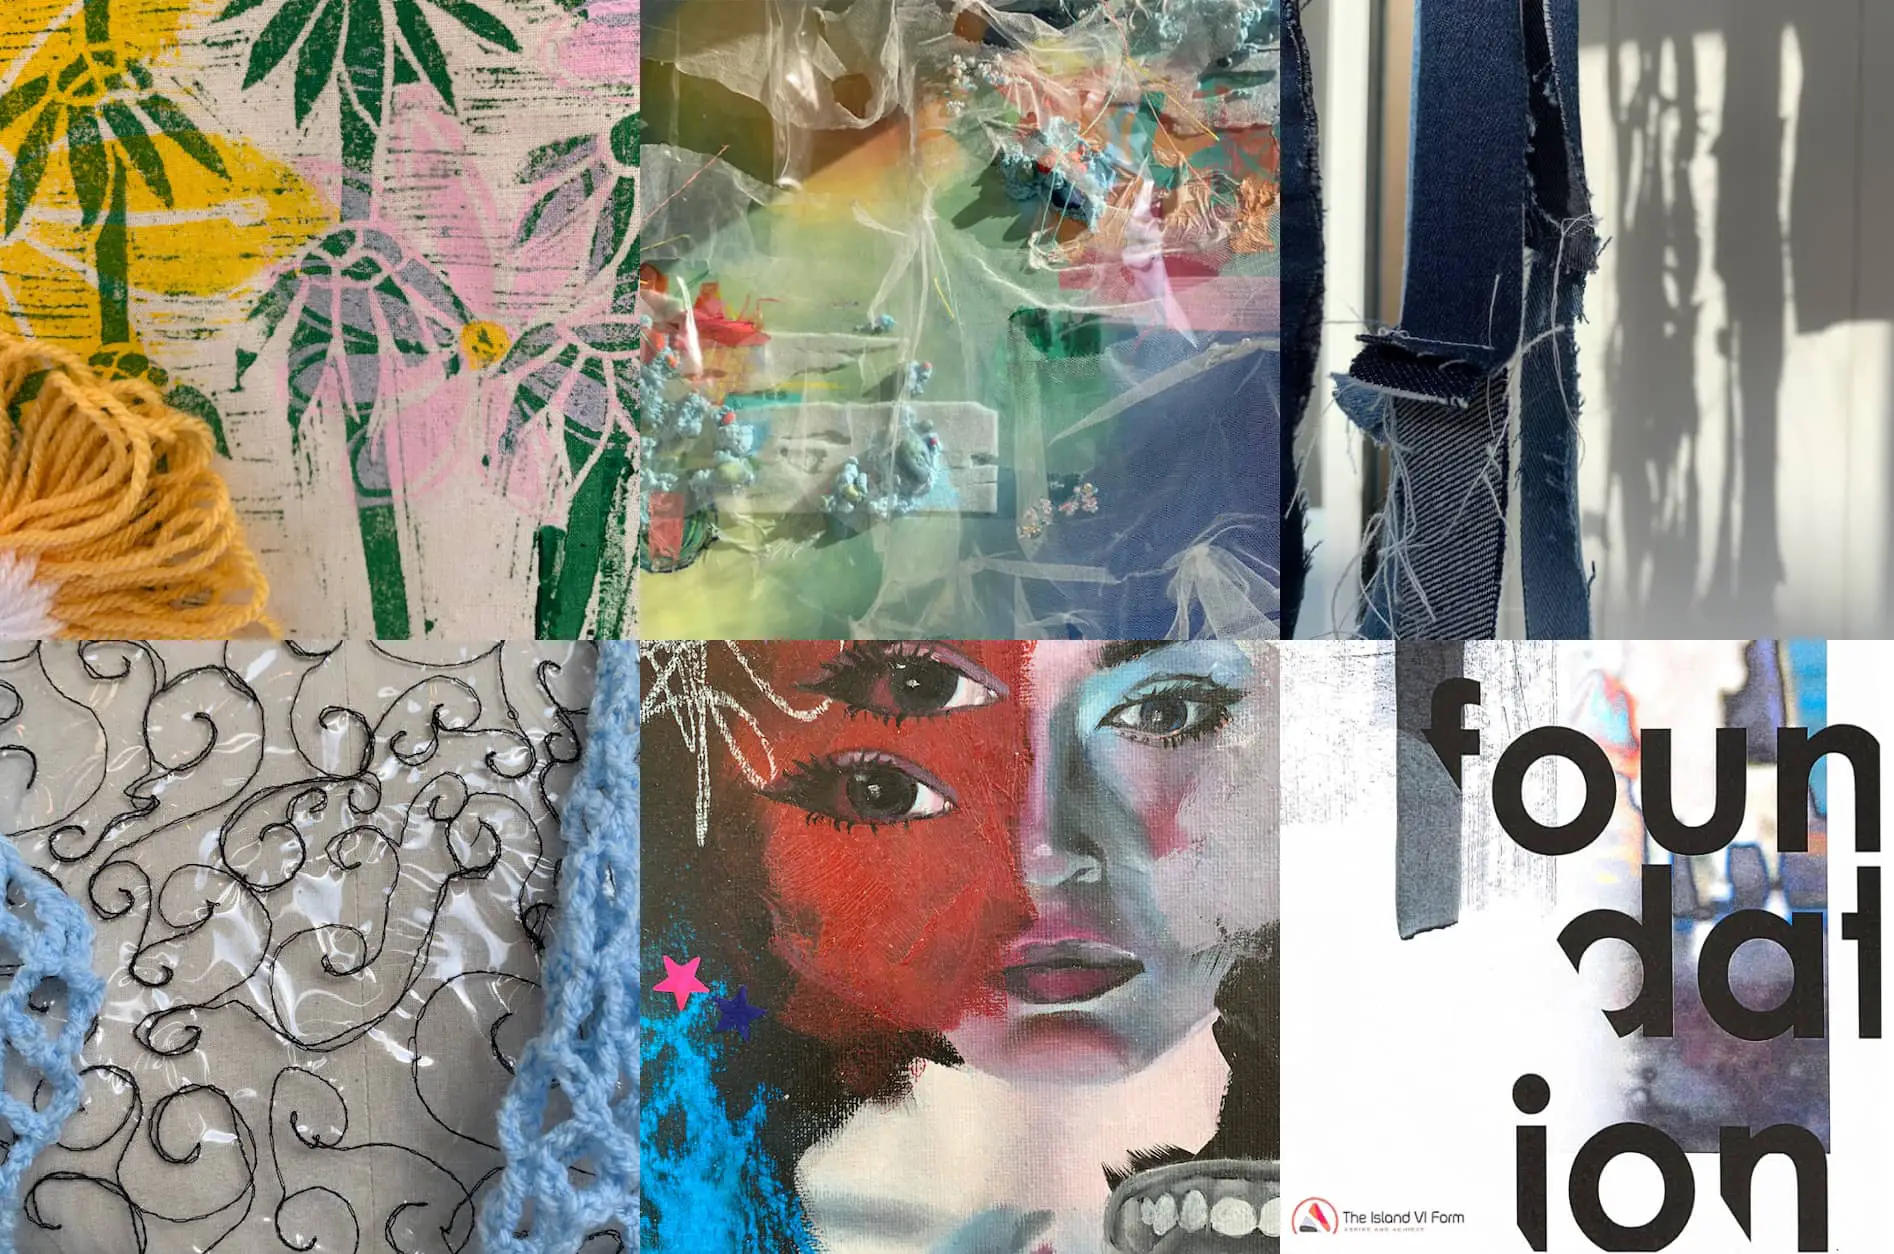 Montage of images created by Foundation of Art students